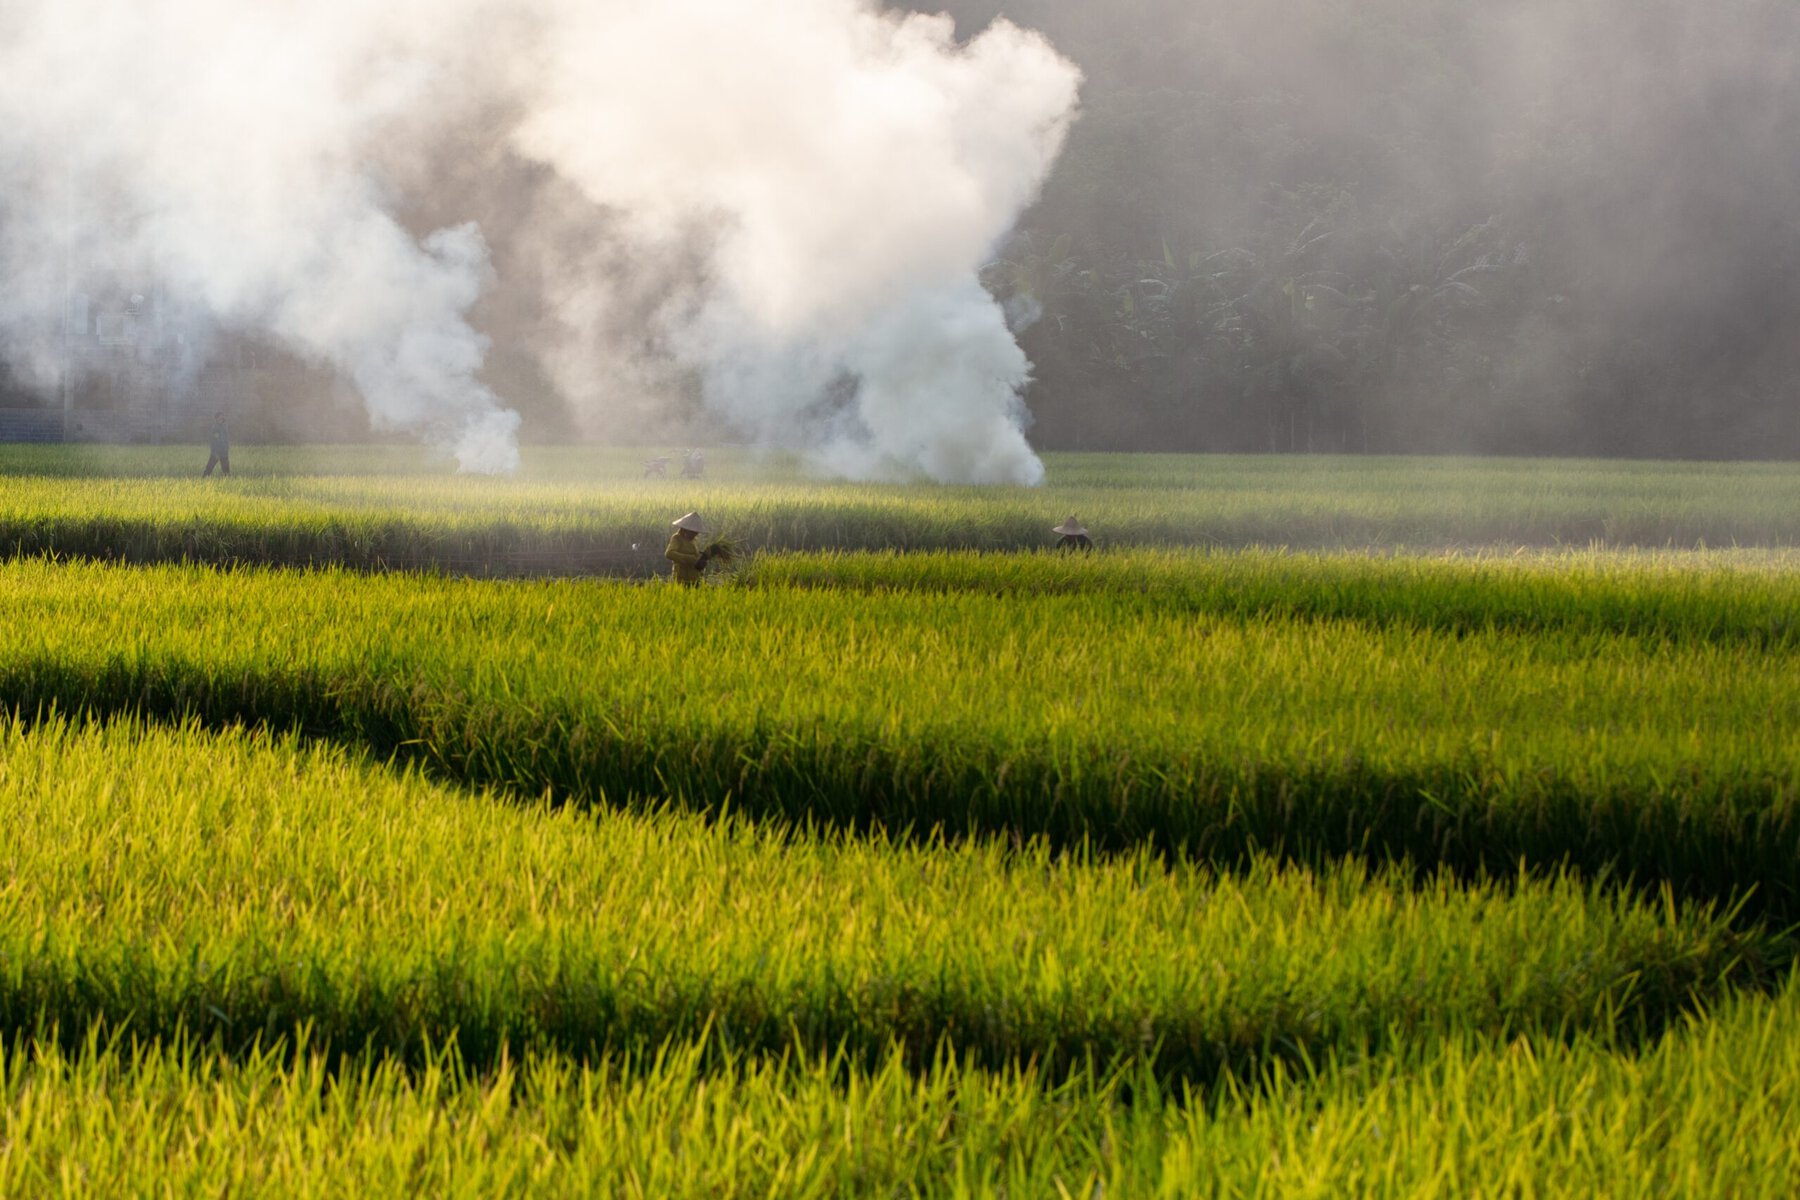 Rice straw being burned in a field with plumes of smoke rising.